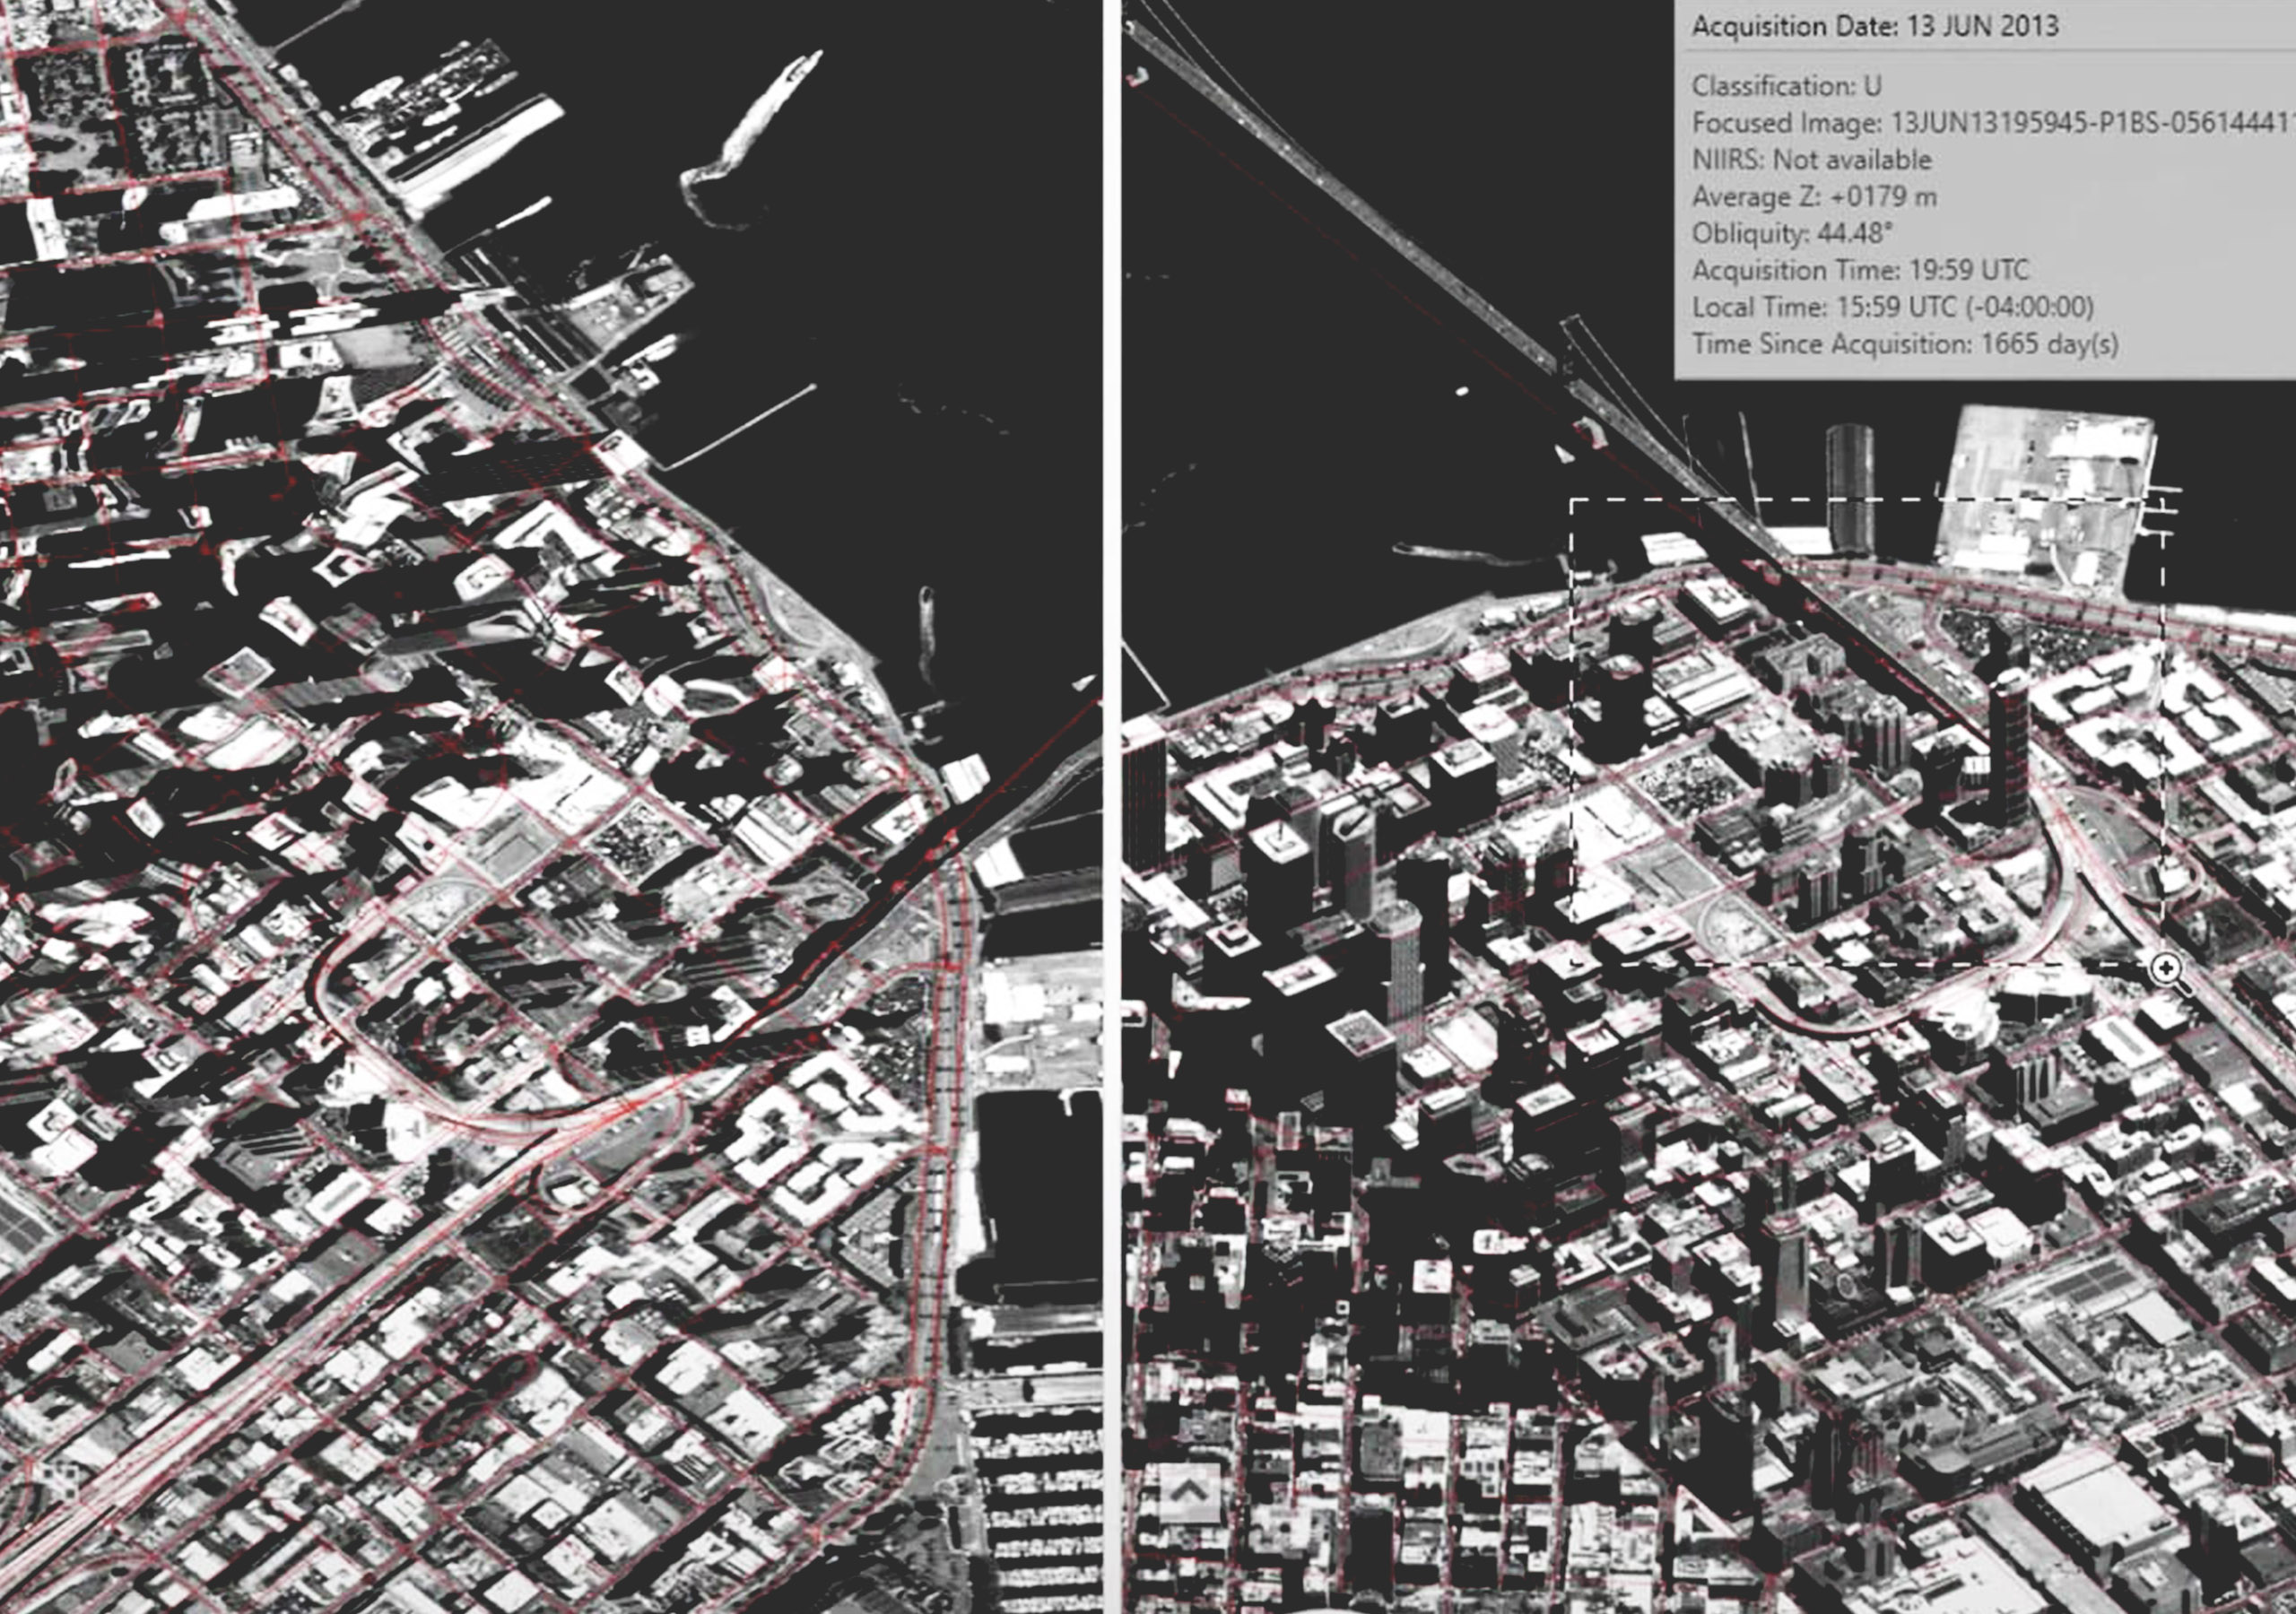 A slider shows a black-and-white, off-nadir image of a waterfront city before and after correction for distortion